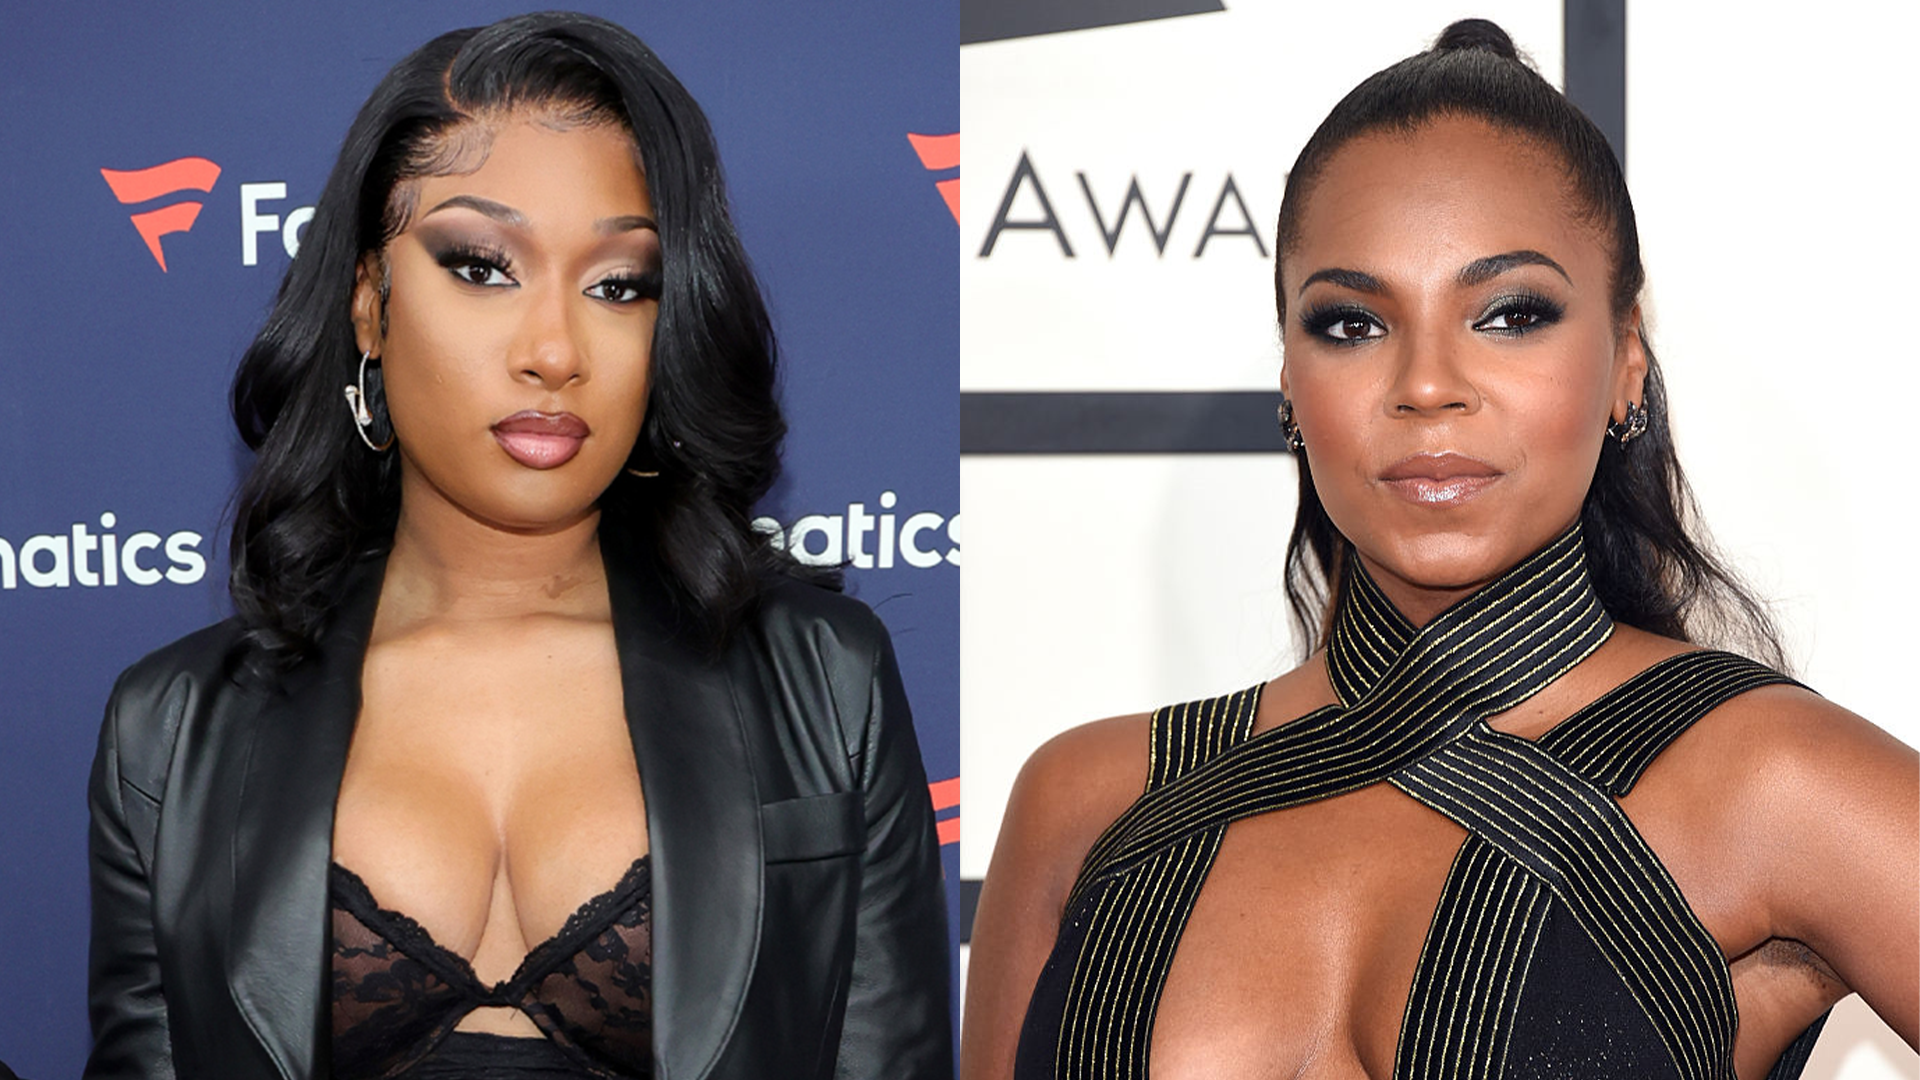 From Megan Thee Stallion To Ashanti, Here Are 7 Artists Who Have Been Vocal About The Business Behind The Music